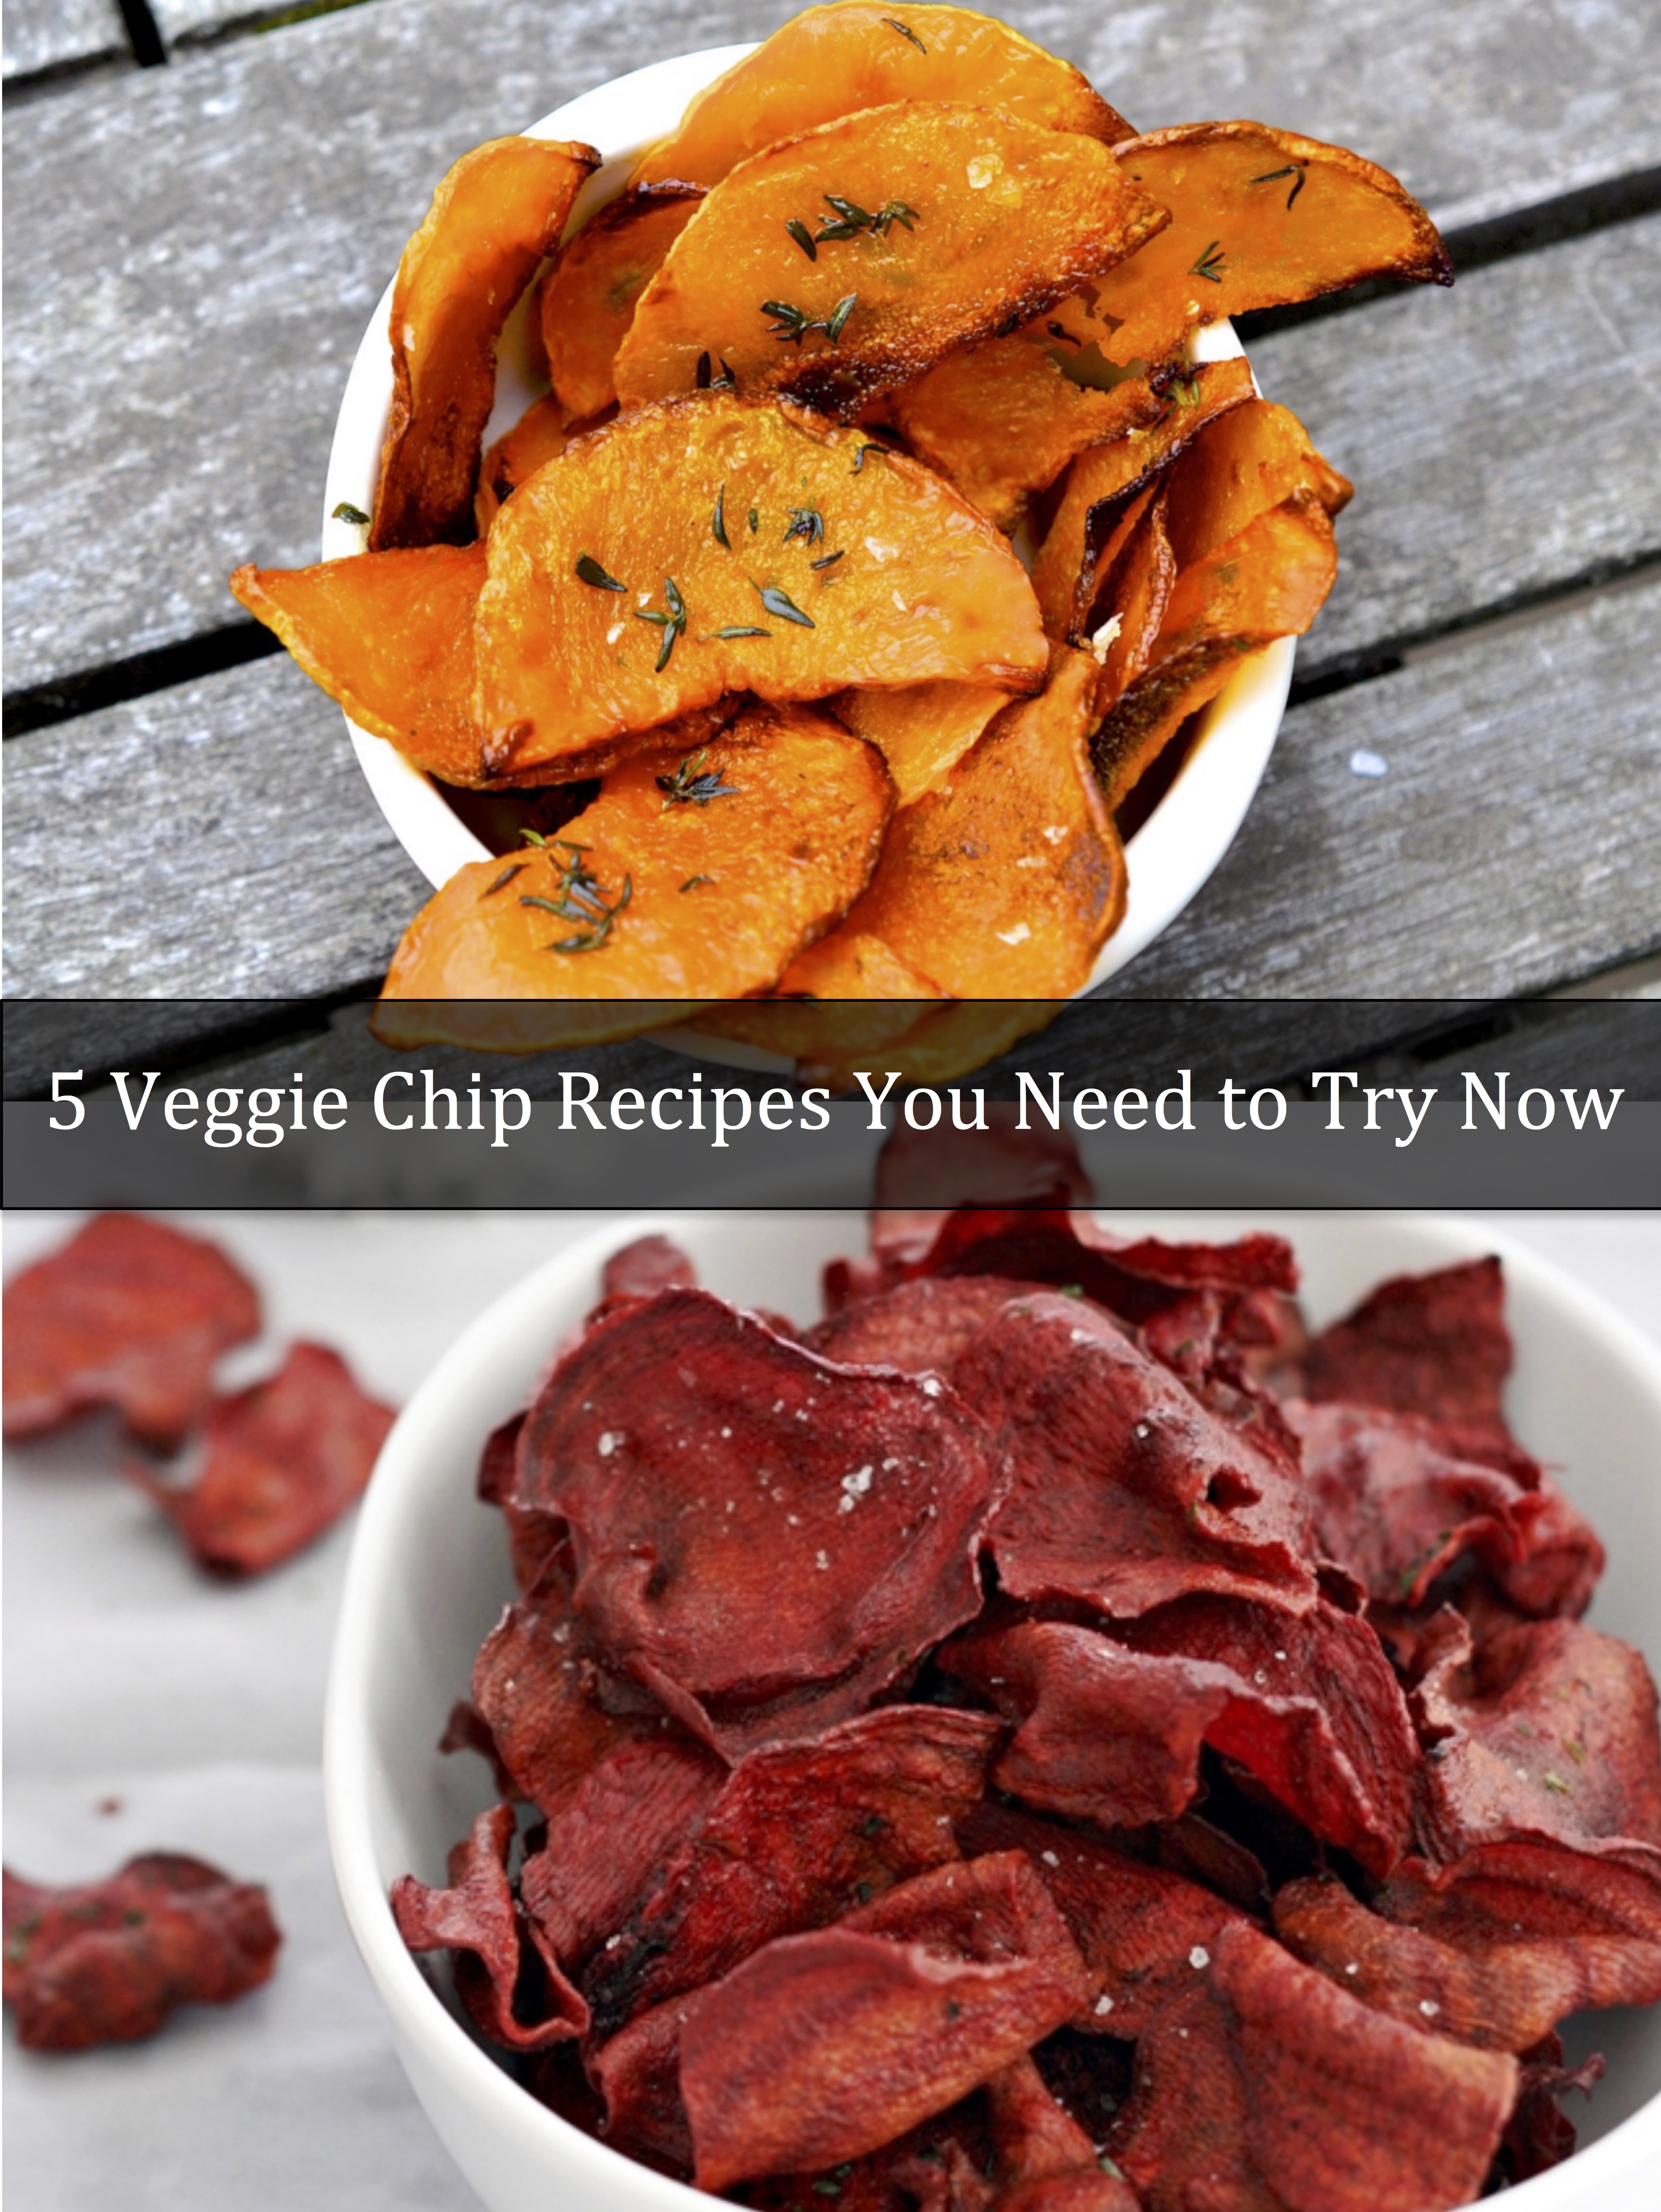 5 Veggie Chip Recipes You Need to Try Now